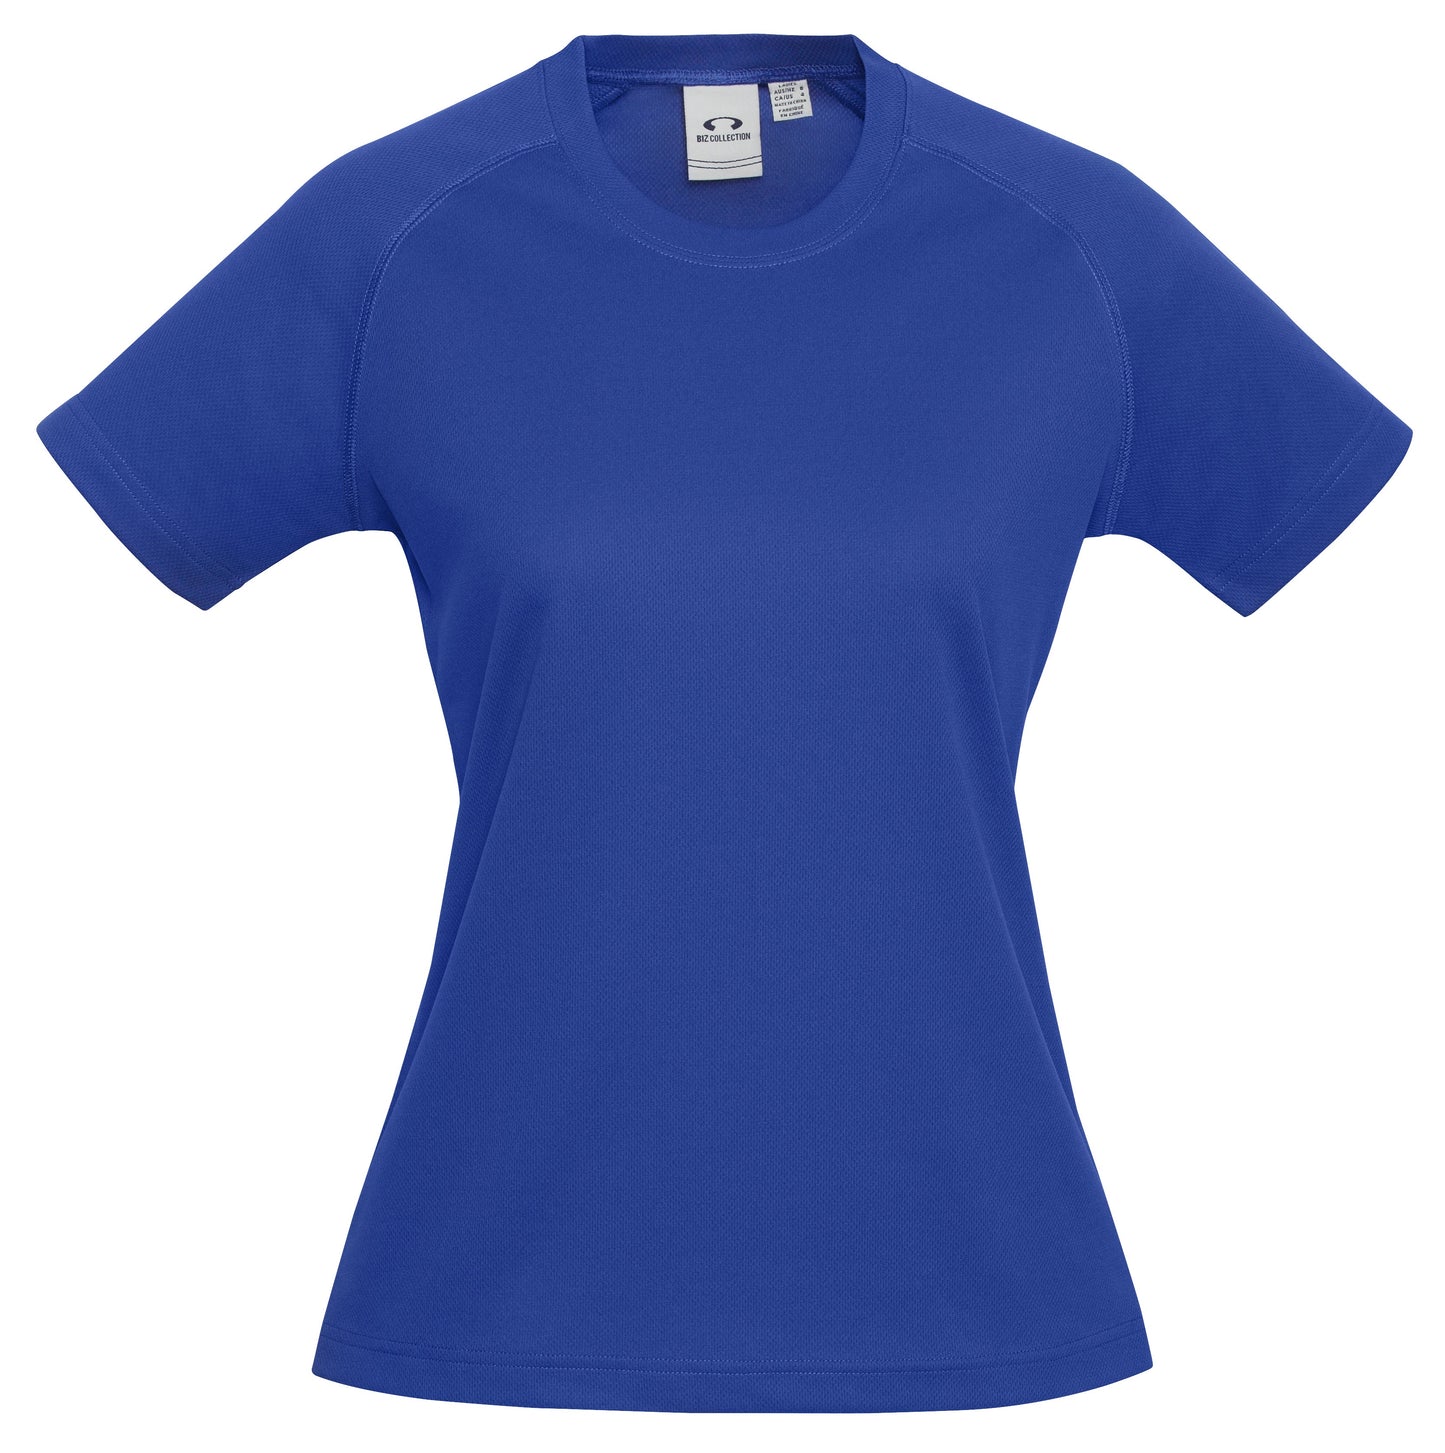 Ladies Sprint T-Shirt - Blue Only